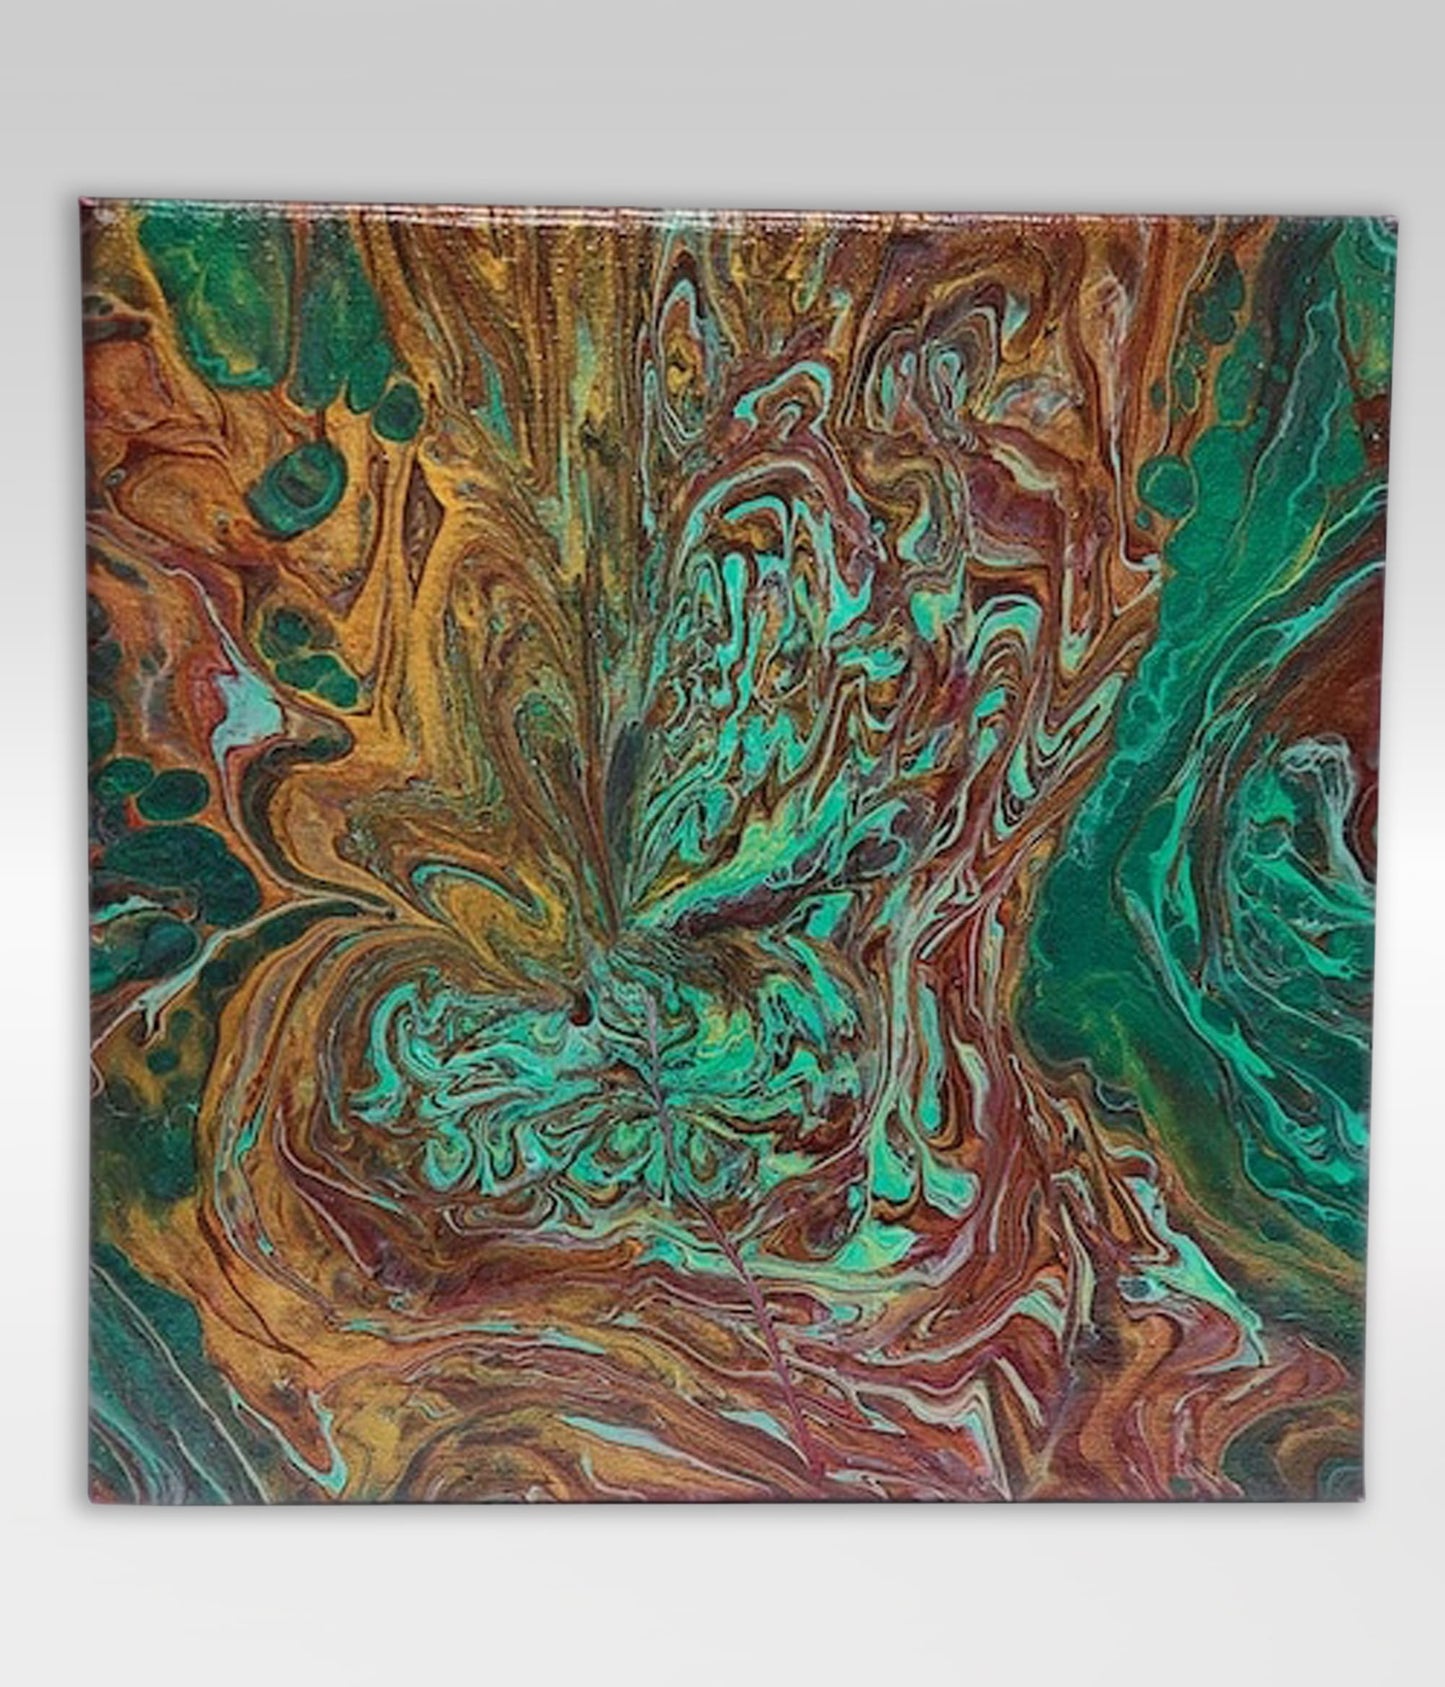 Emotive – 10 x 10 Acrylic Pour Painting On Canvas